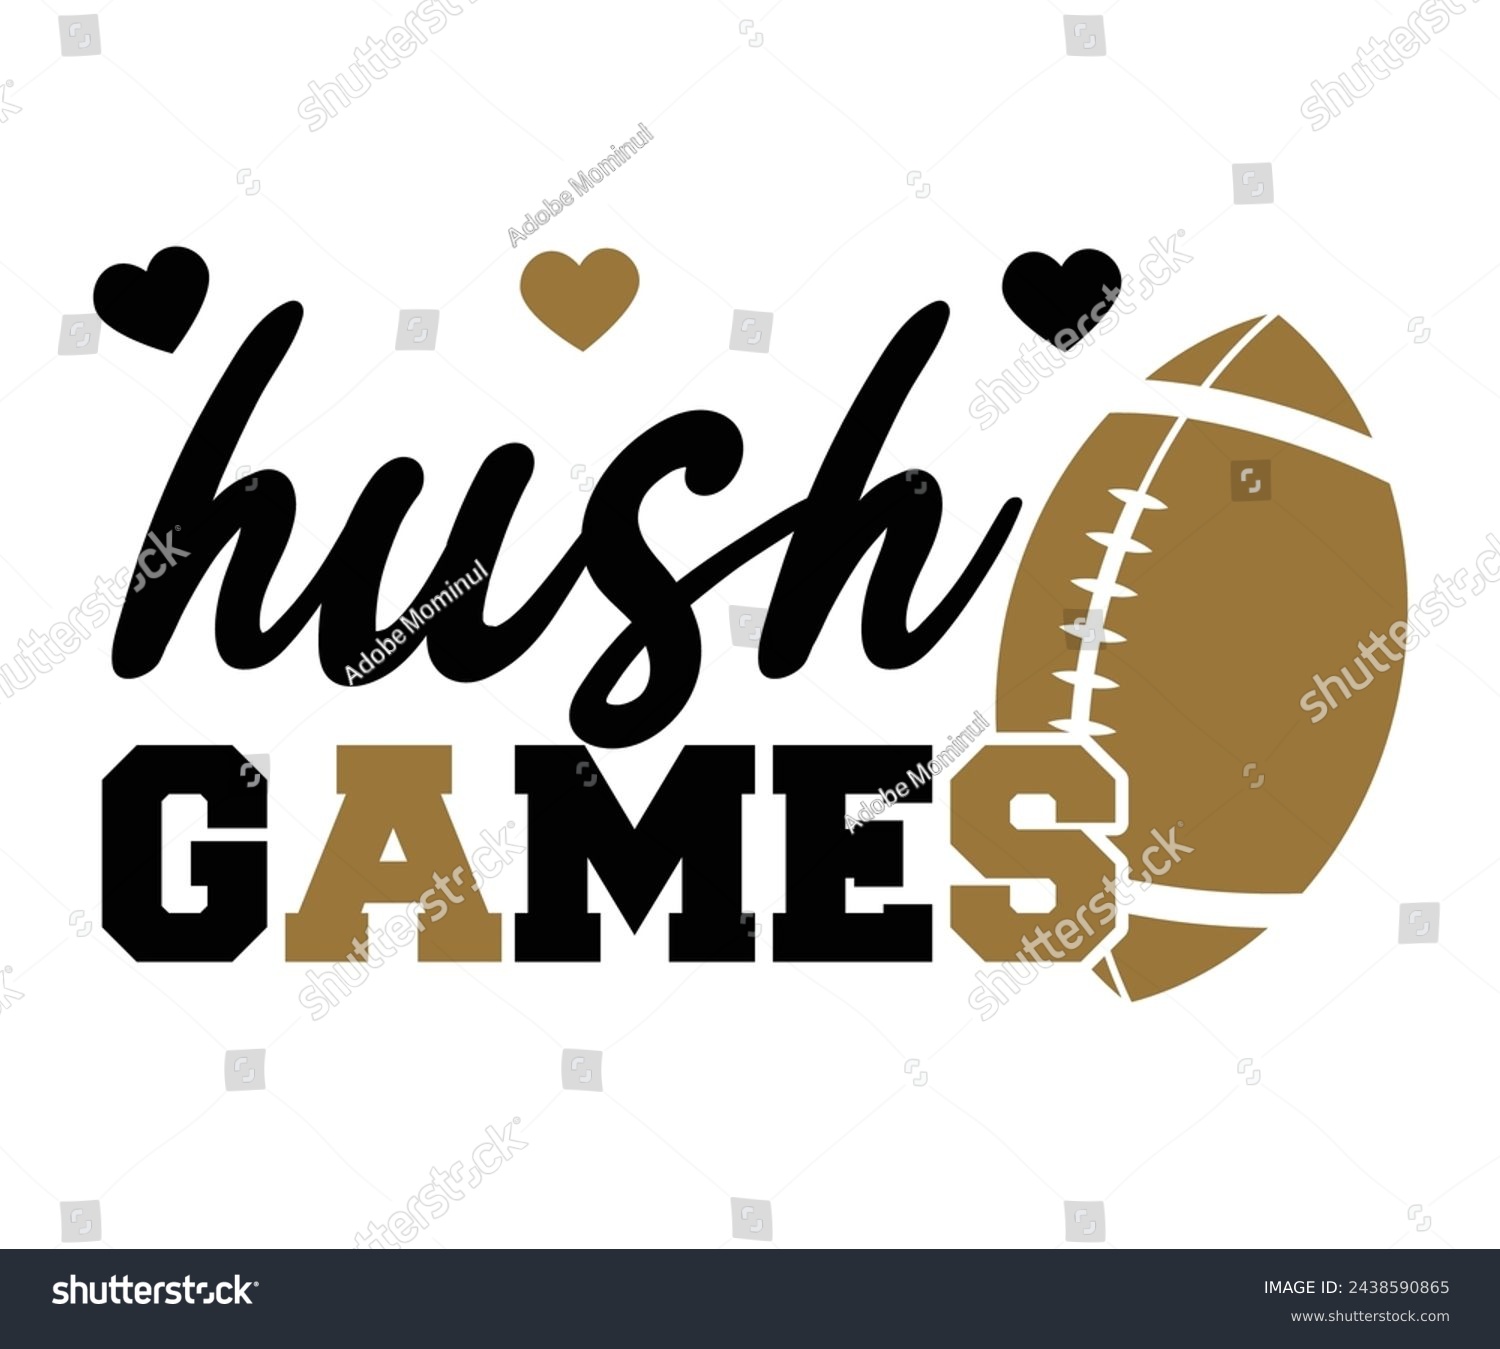 SVG of Hush  Games,Football Svg,Football Player Svg,Game Day Shirt,Football Quotes Svg,American Football Svg,Soccer Svg,Cut File,Commercial use svg